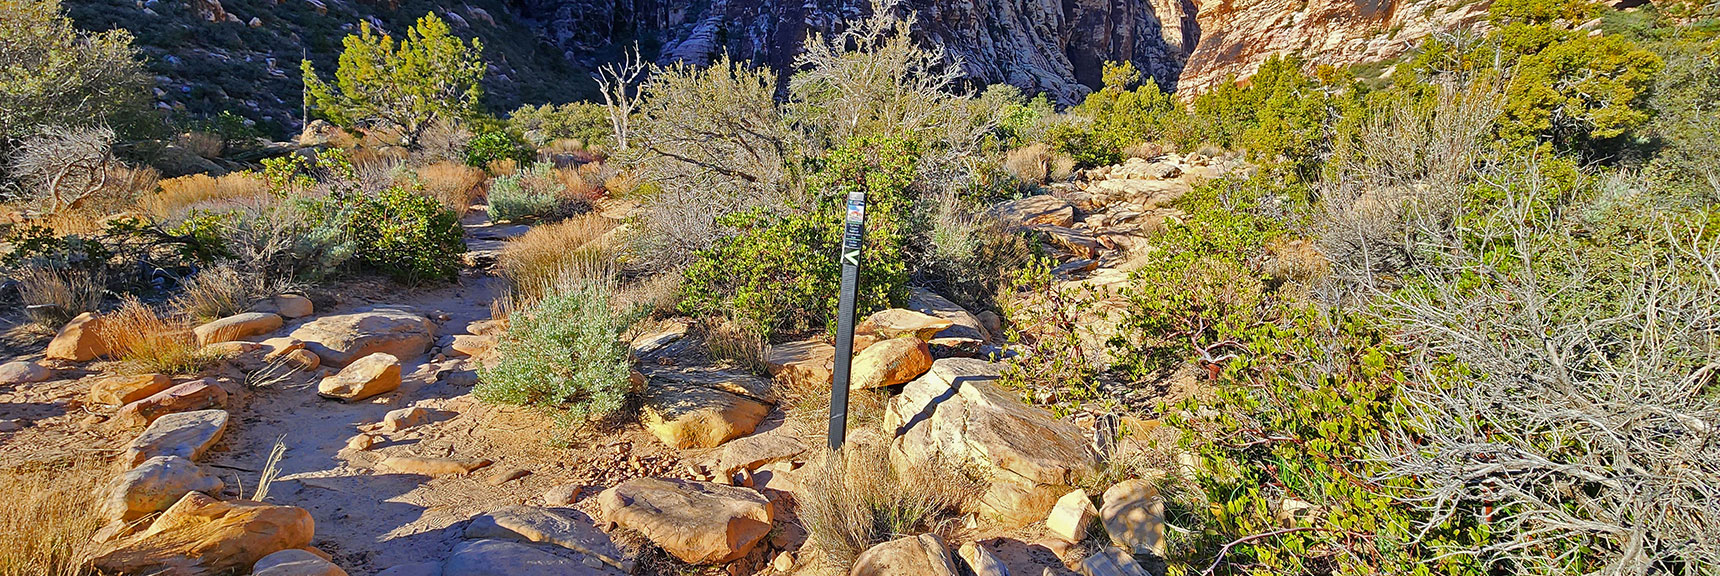 Good Signage Gets You To the Canyon Opening. After That You're On Your Own. | Ice Box Canyon | Red Rock Canyon NCA, Nevada | Las Vegas Area Trails | David Smith